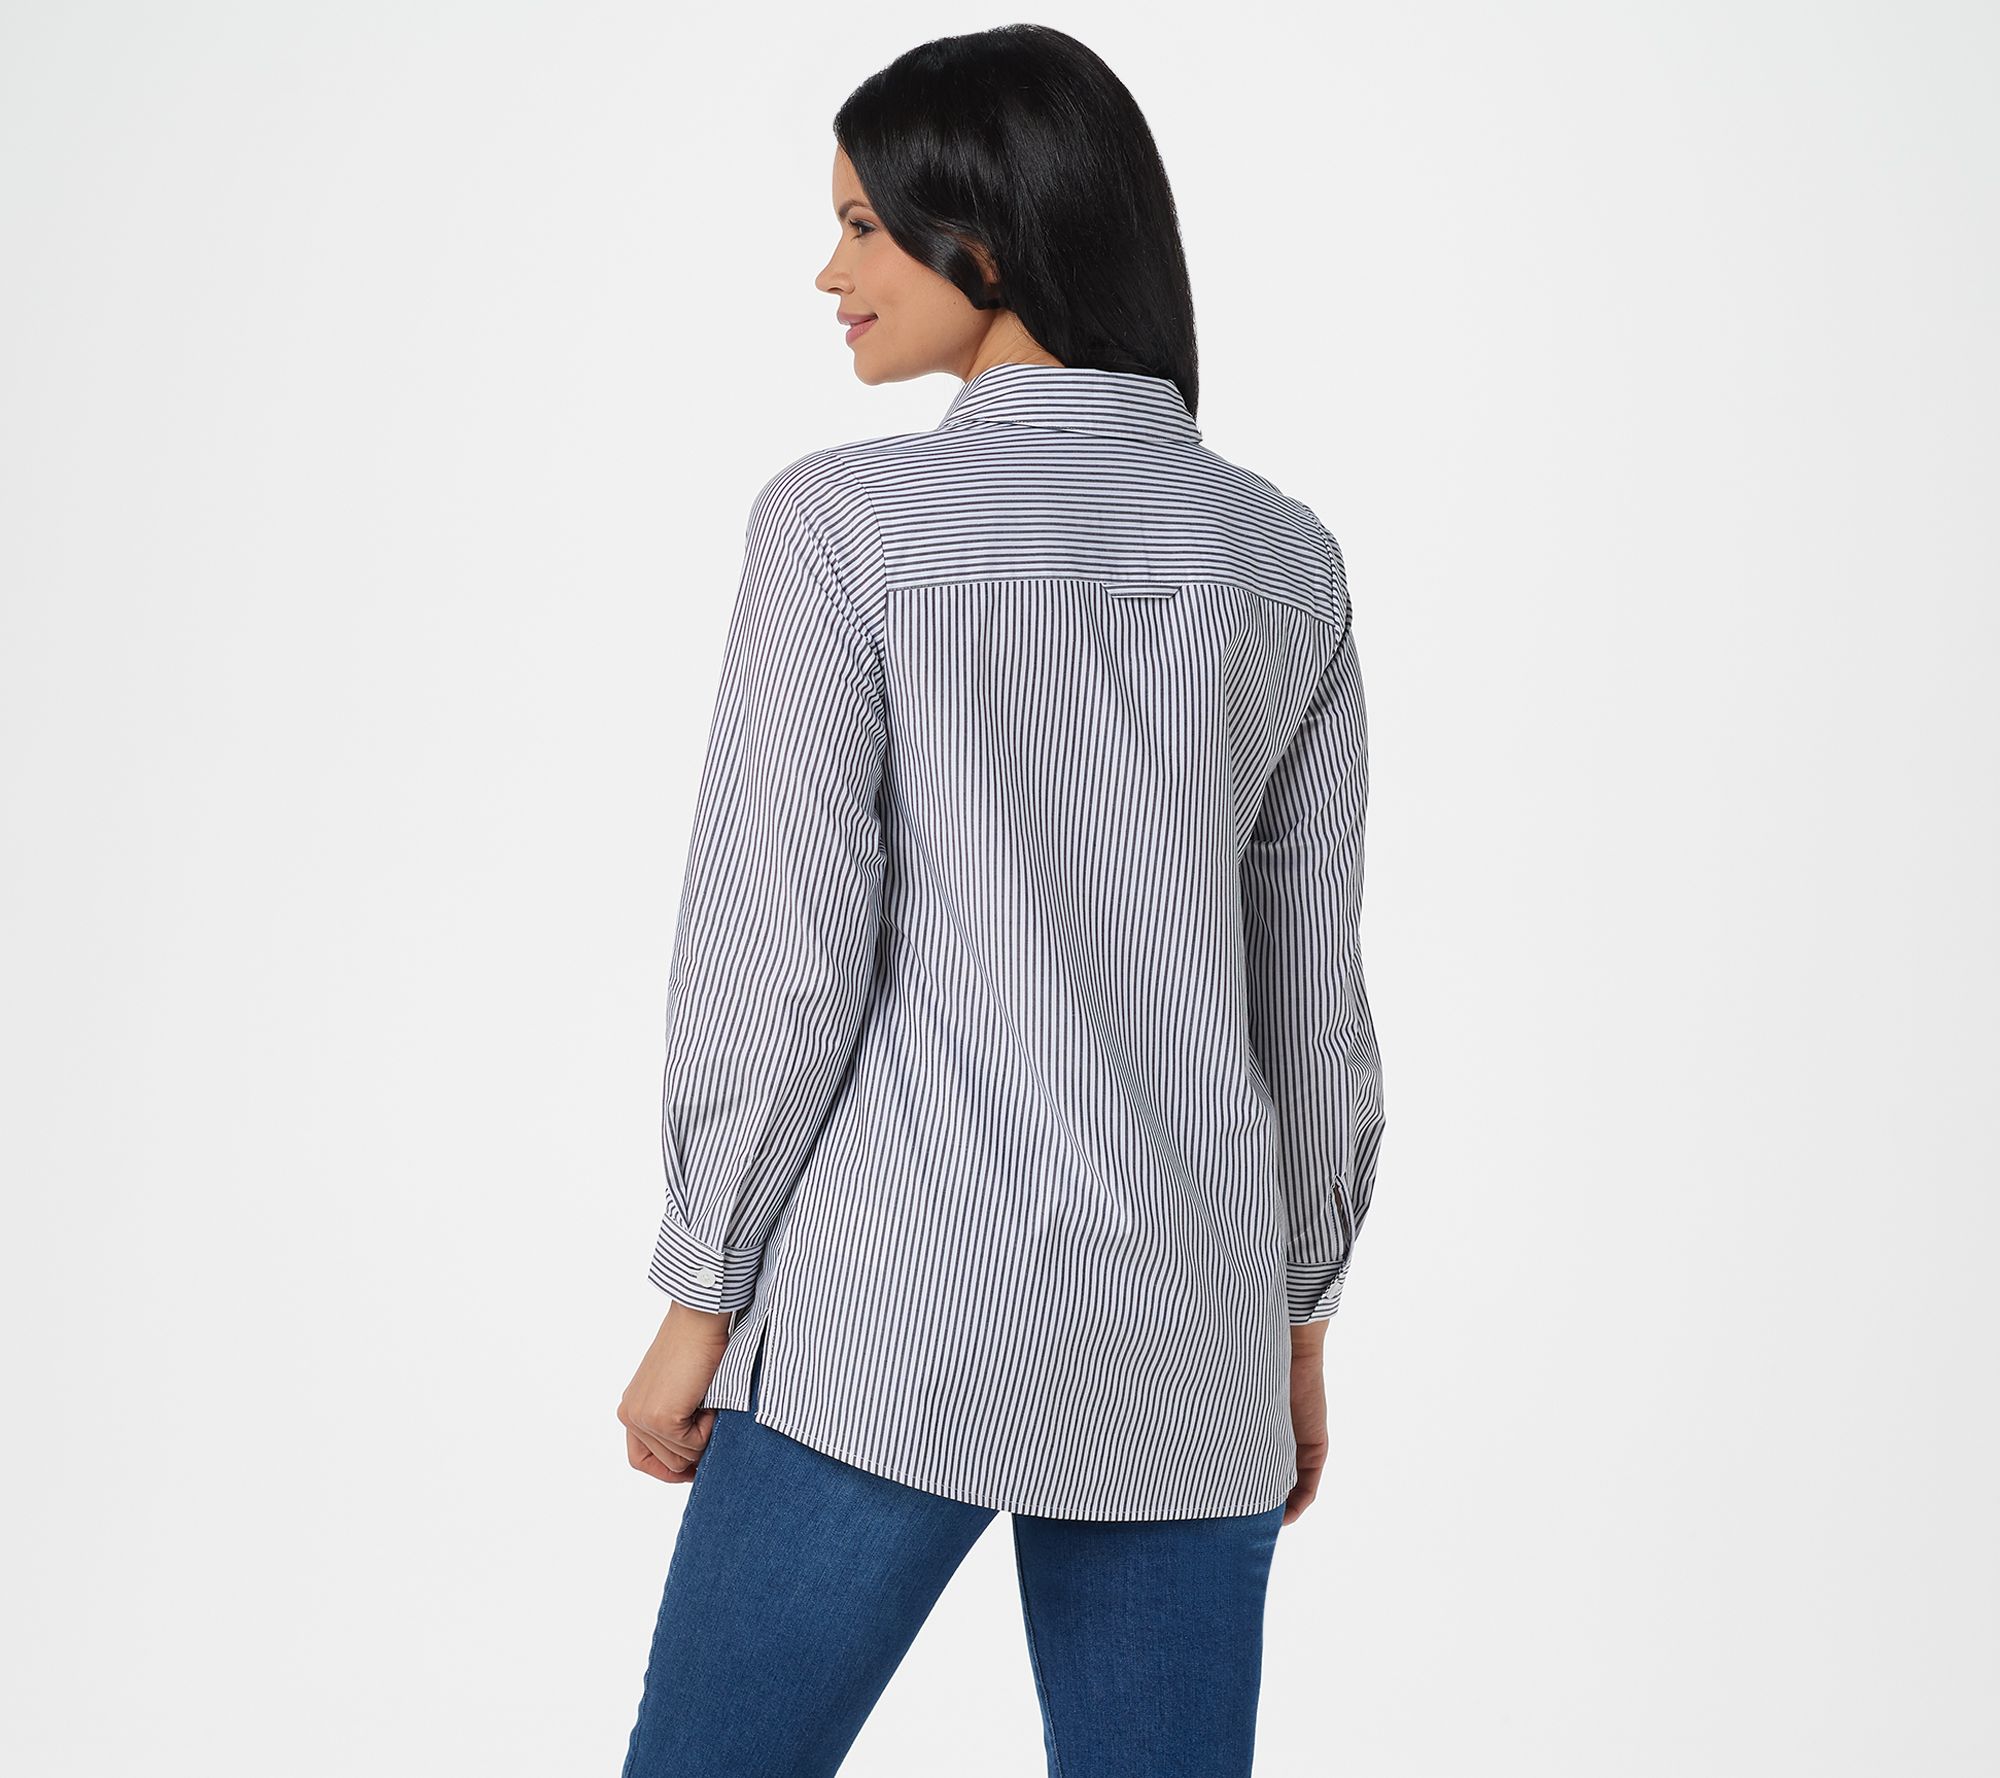 Quacker Factory Embroidered Striped Button Front Shirt - QVC.com